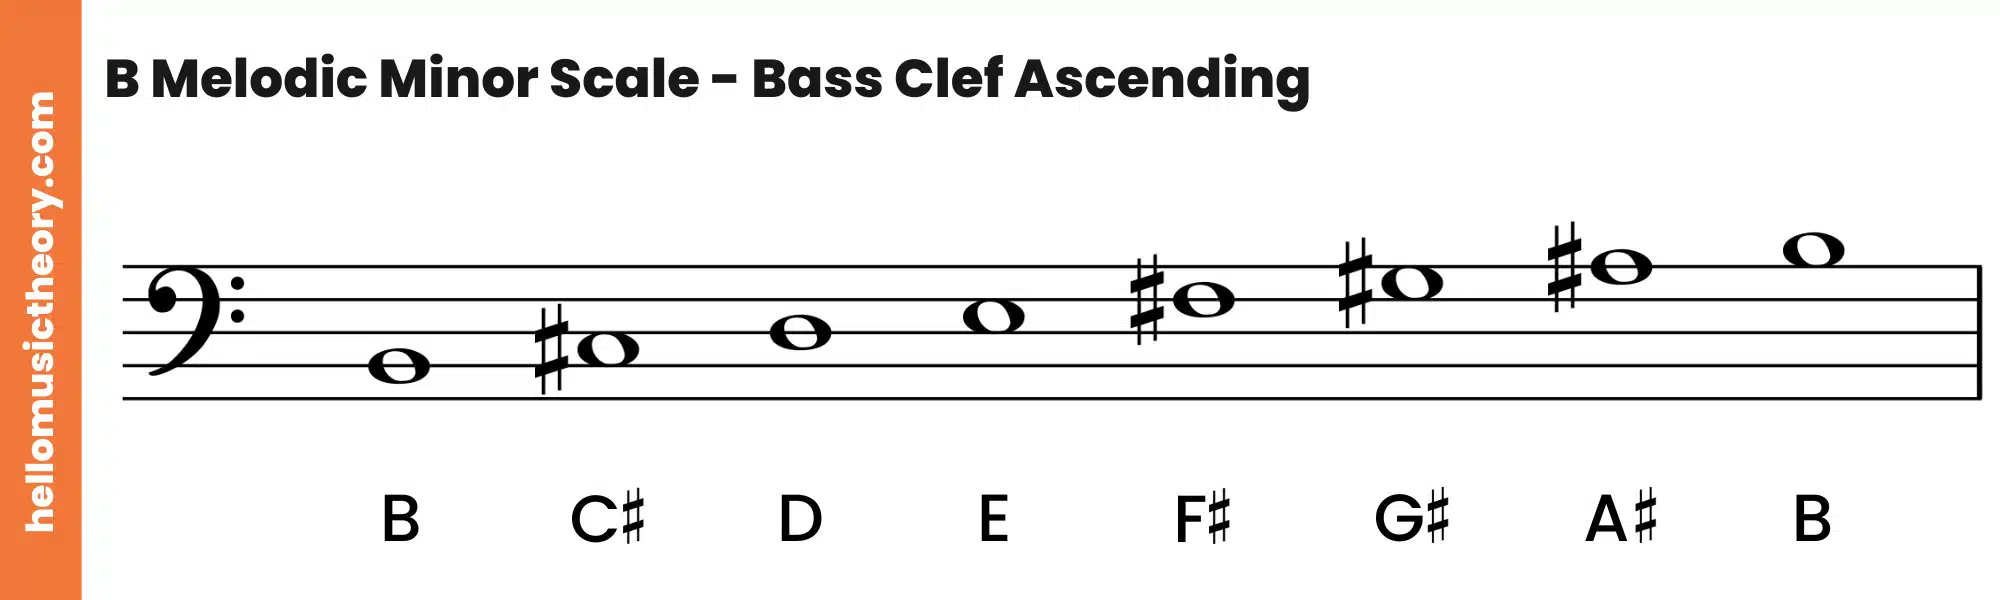 B Melodic Minor Scale Bass Clef Ascending